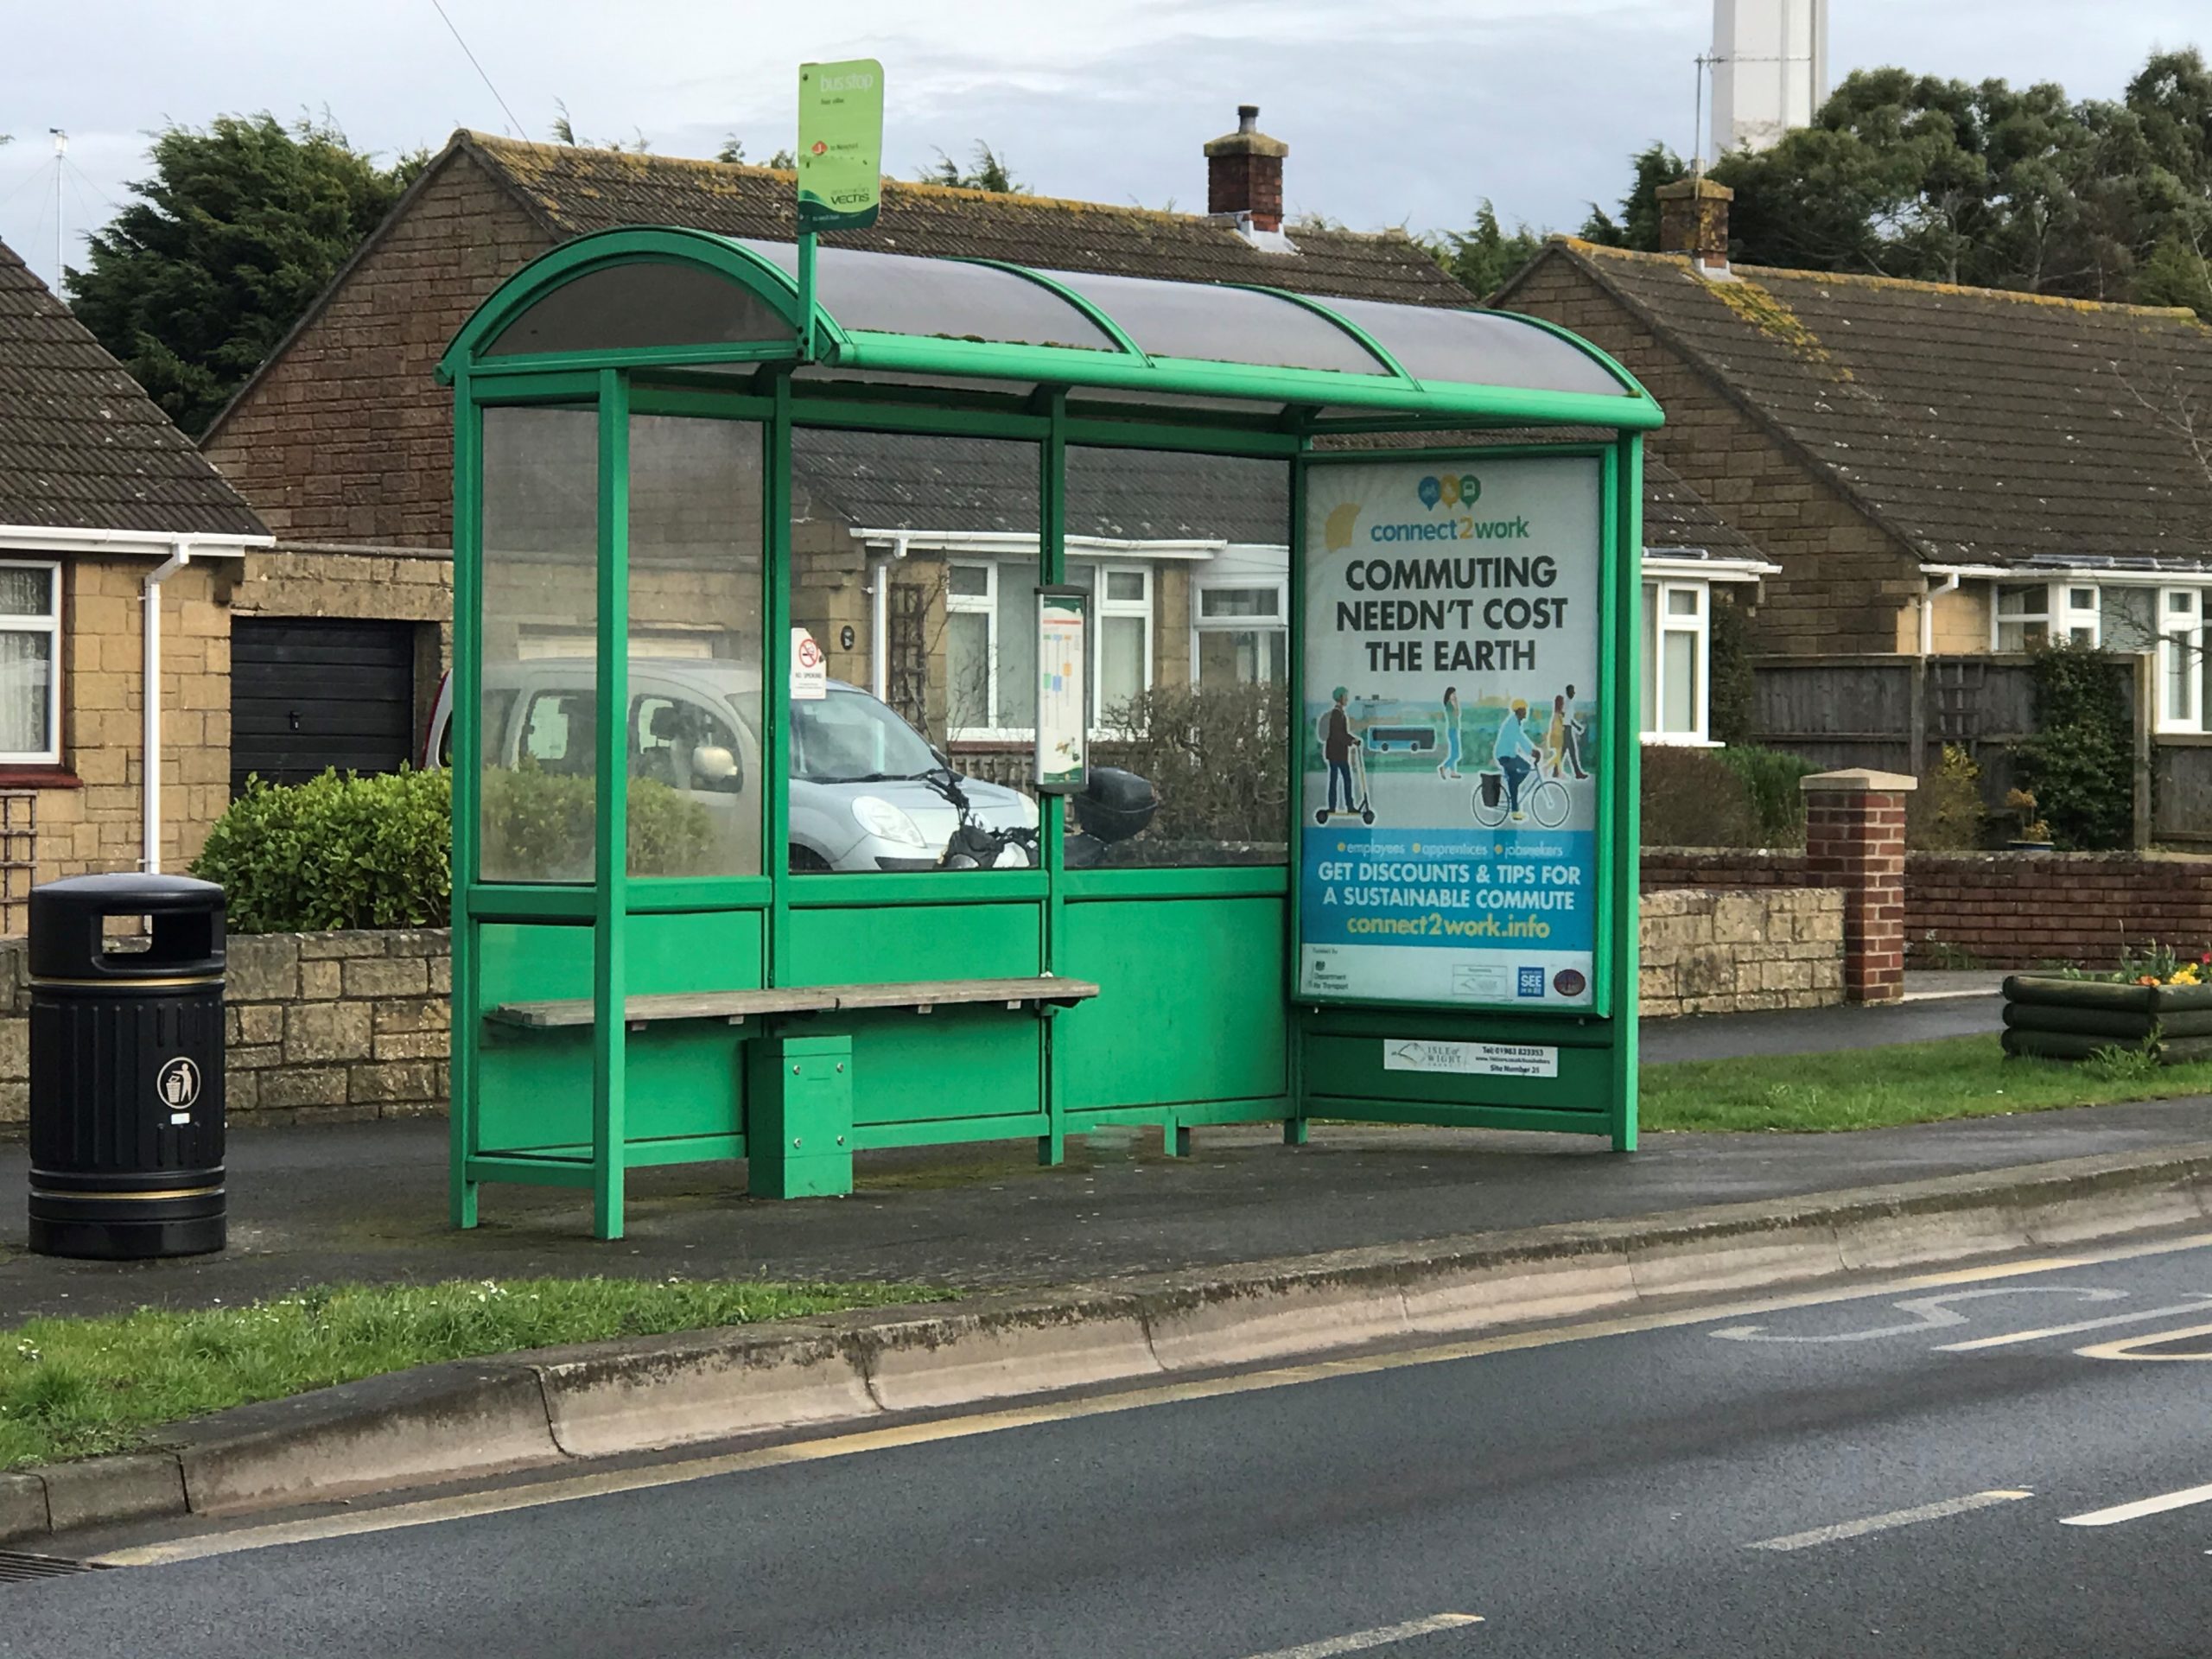 Photo showing a bus shelter at the side of the road in Cowes